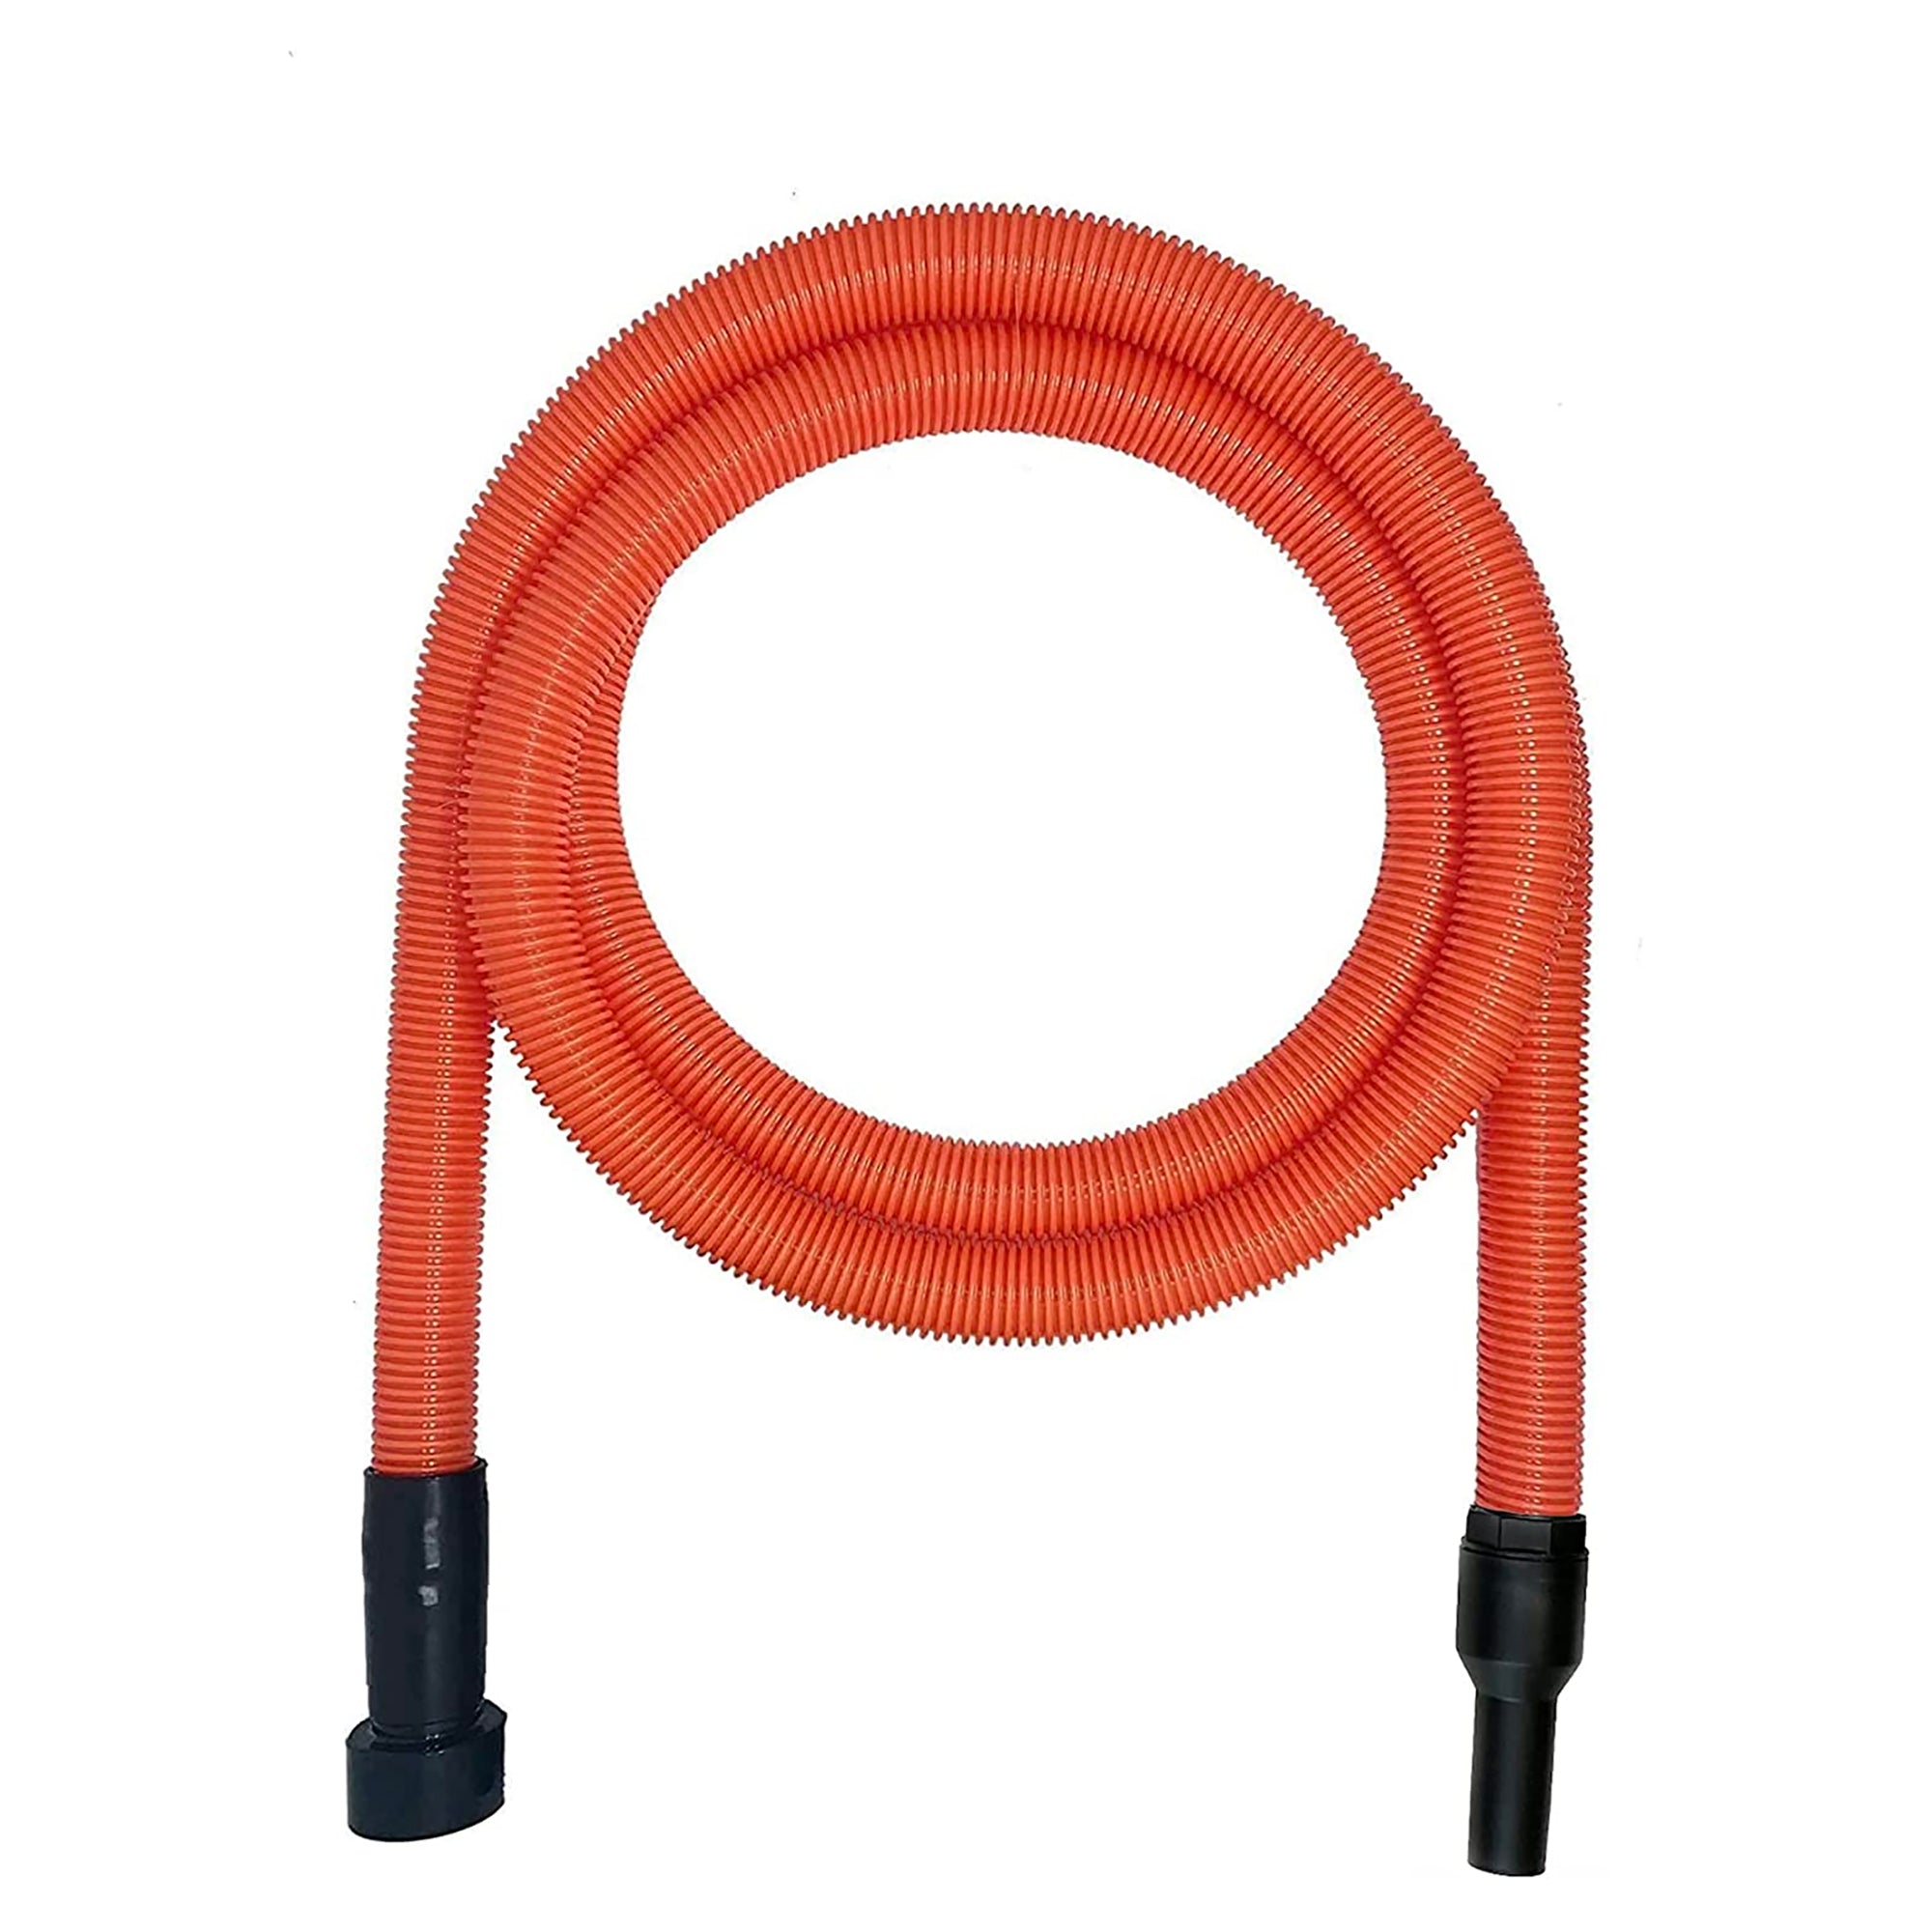 VPC Dust Collection Hose for Home and Shop Vacuums with Adapter Fittings 10 ft